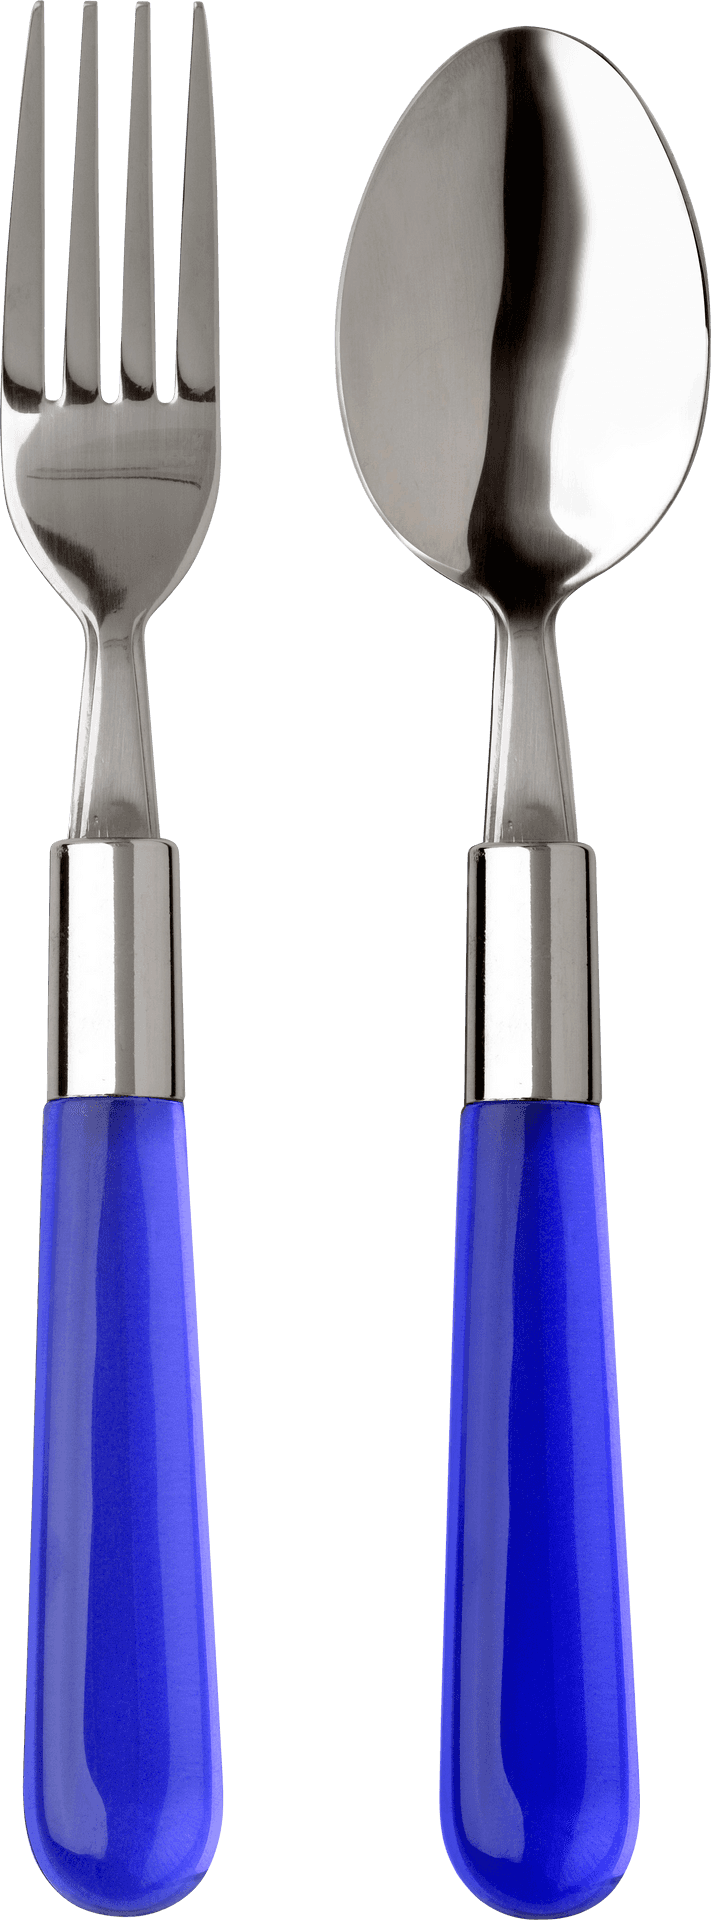 Blue Handled Forkand Spoon Set PNG